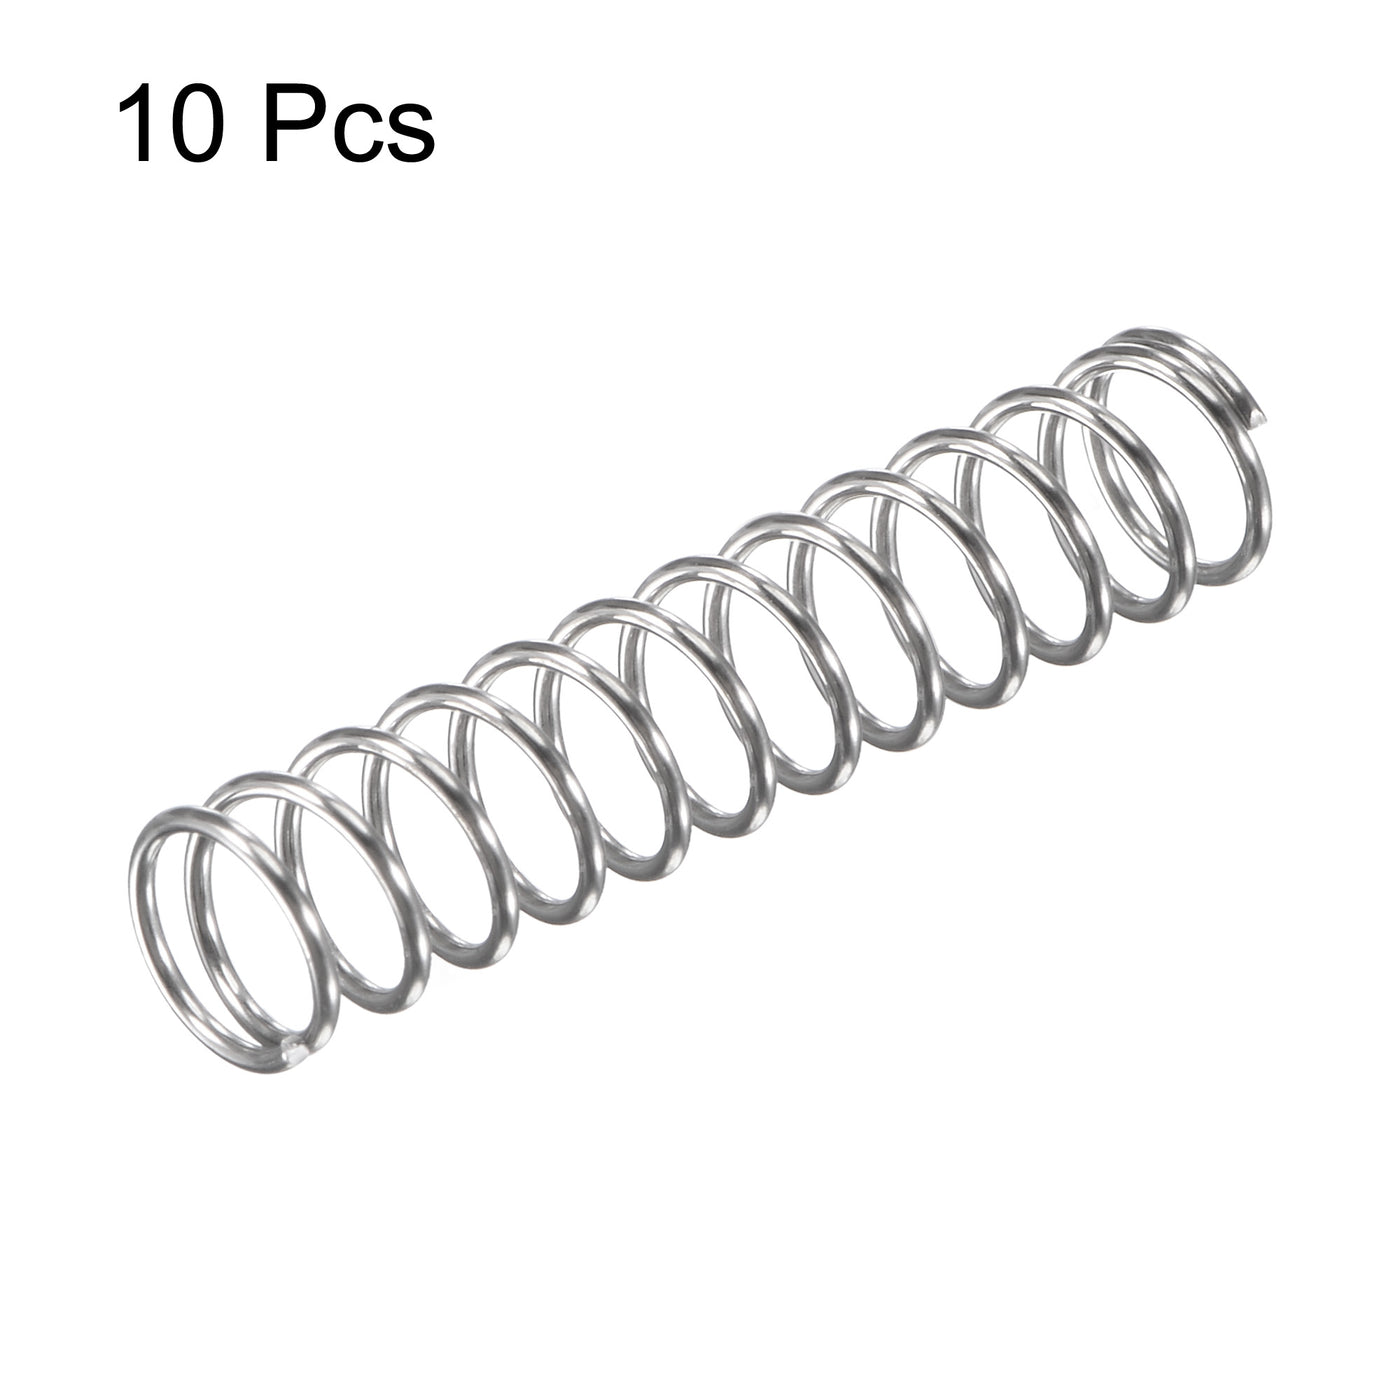 uxcell Uxcell 8mmx0.8mmx35mm 304 Stainless Steel Compression Spring 11.8N Load Capacity 10pcs